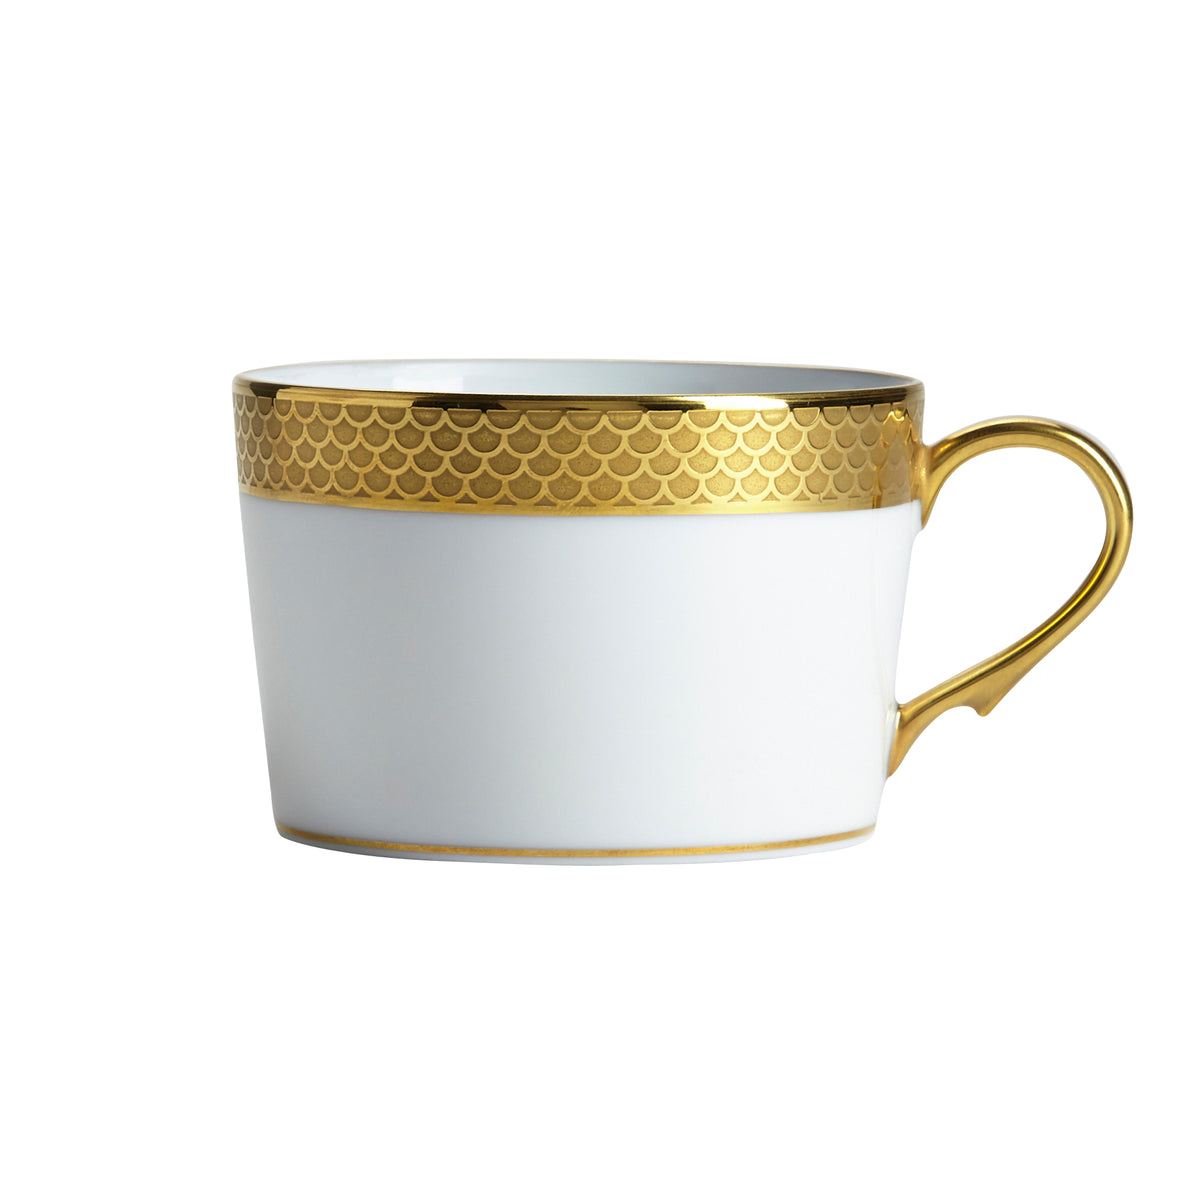 Odyssee Gold Porcelain Tea Cup and Saucer